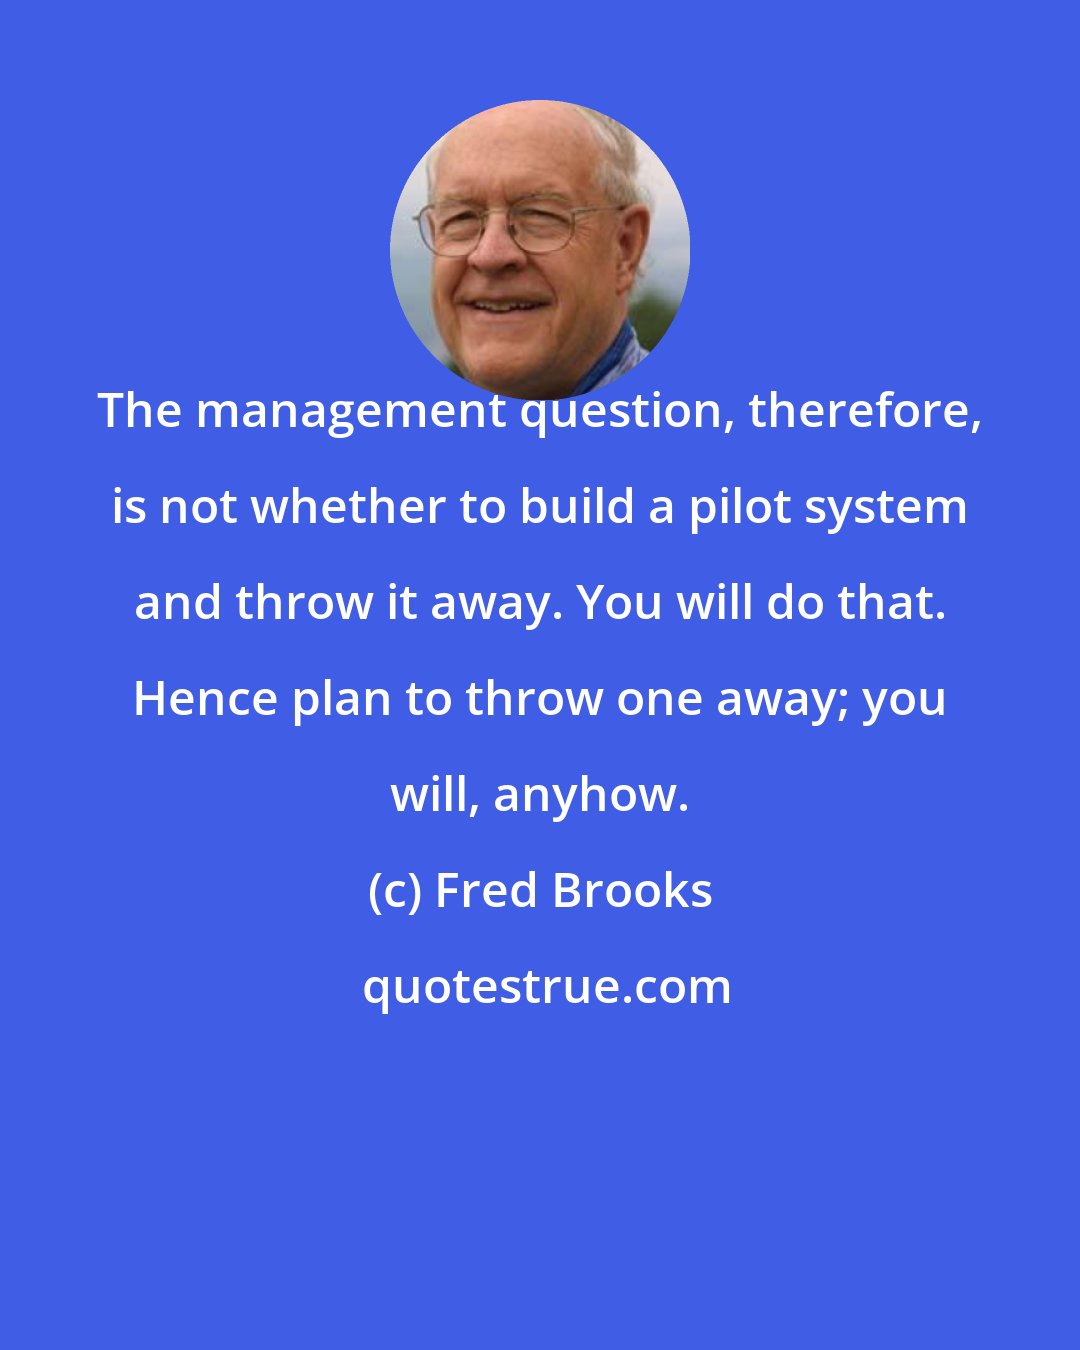 Fred Brooks: The management question, therefore, is not whether to build a pilot system and throw it away. You will do that. Hence plan to throw one away; you will, anyhow.